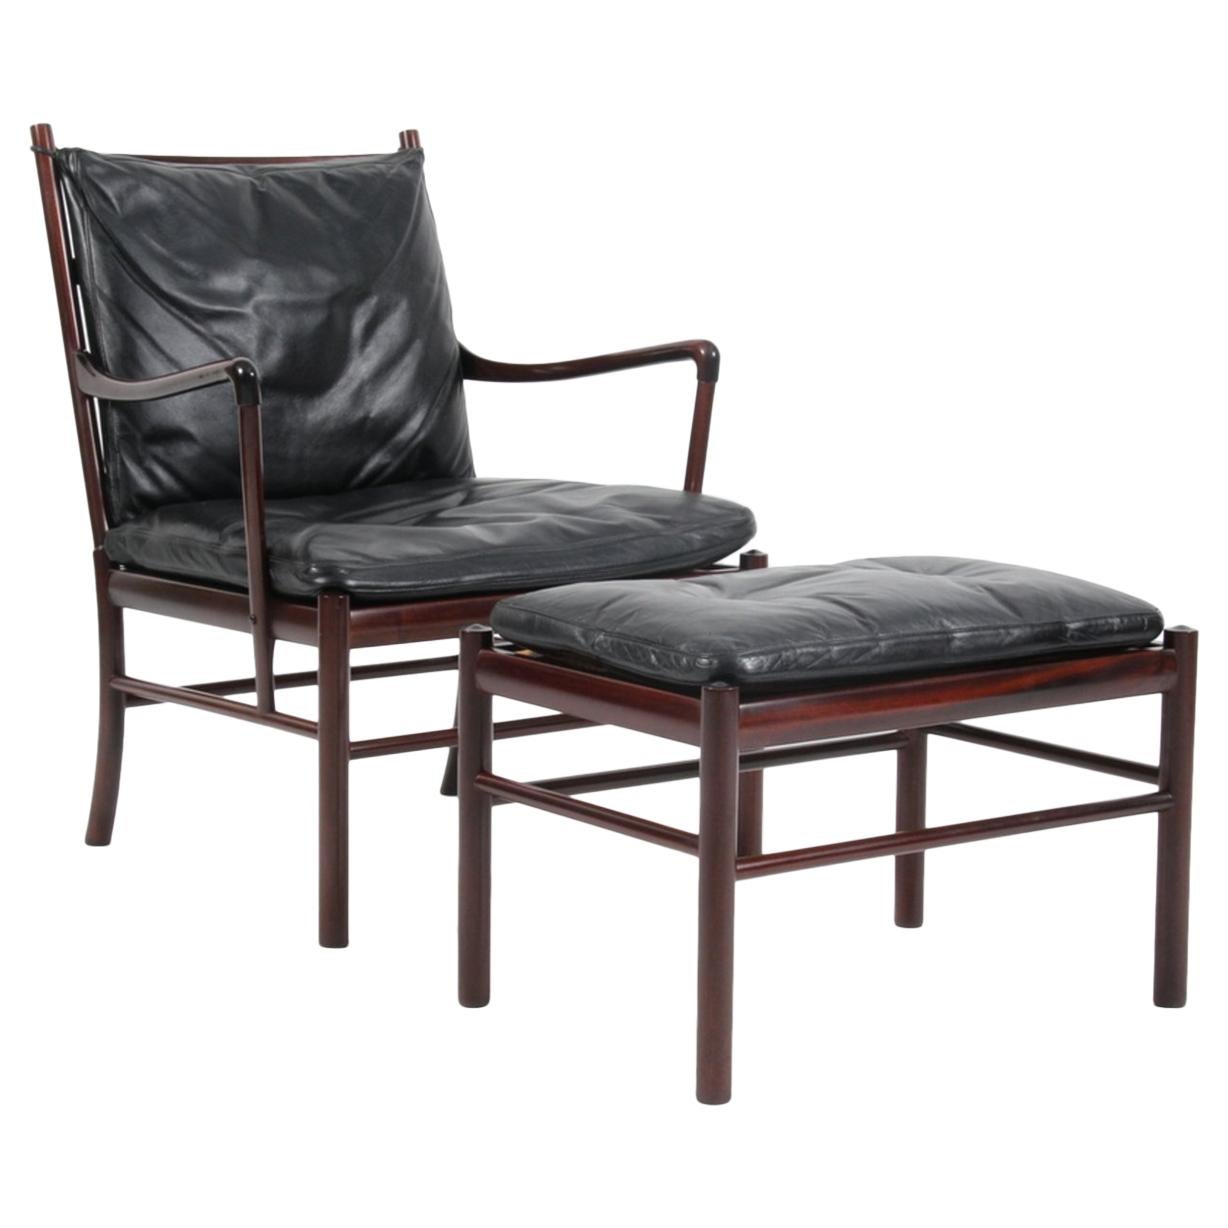 Ole Wanscher Colonial Chair and Ottoman in Mahogany and Original Leather, PJ 149